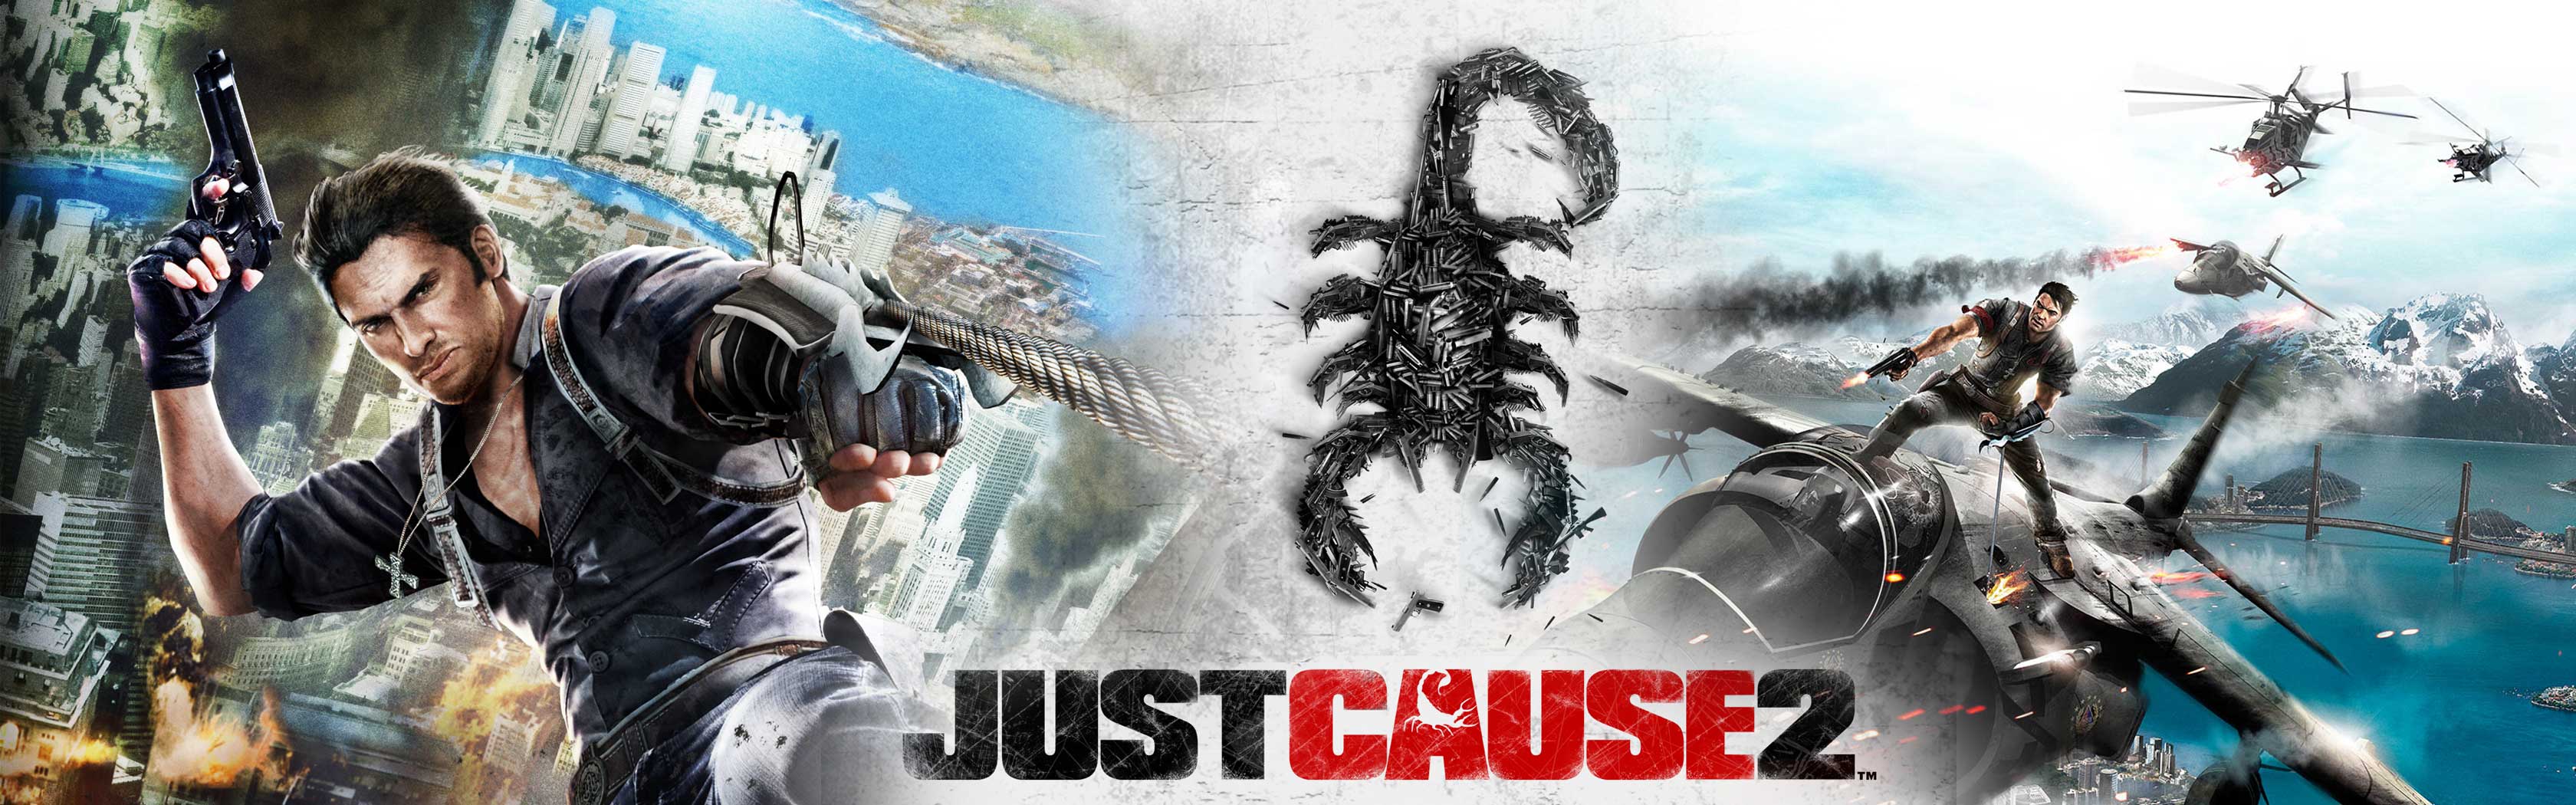 video game, just cause 2, just cause